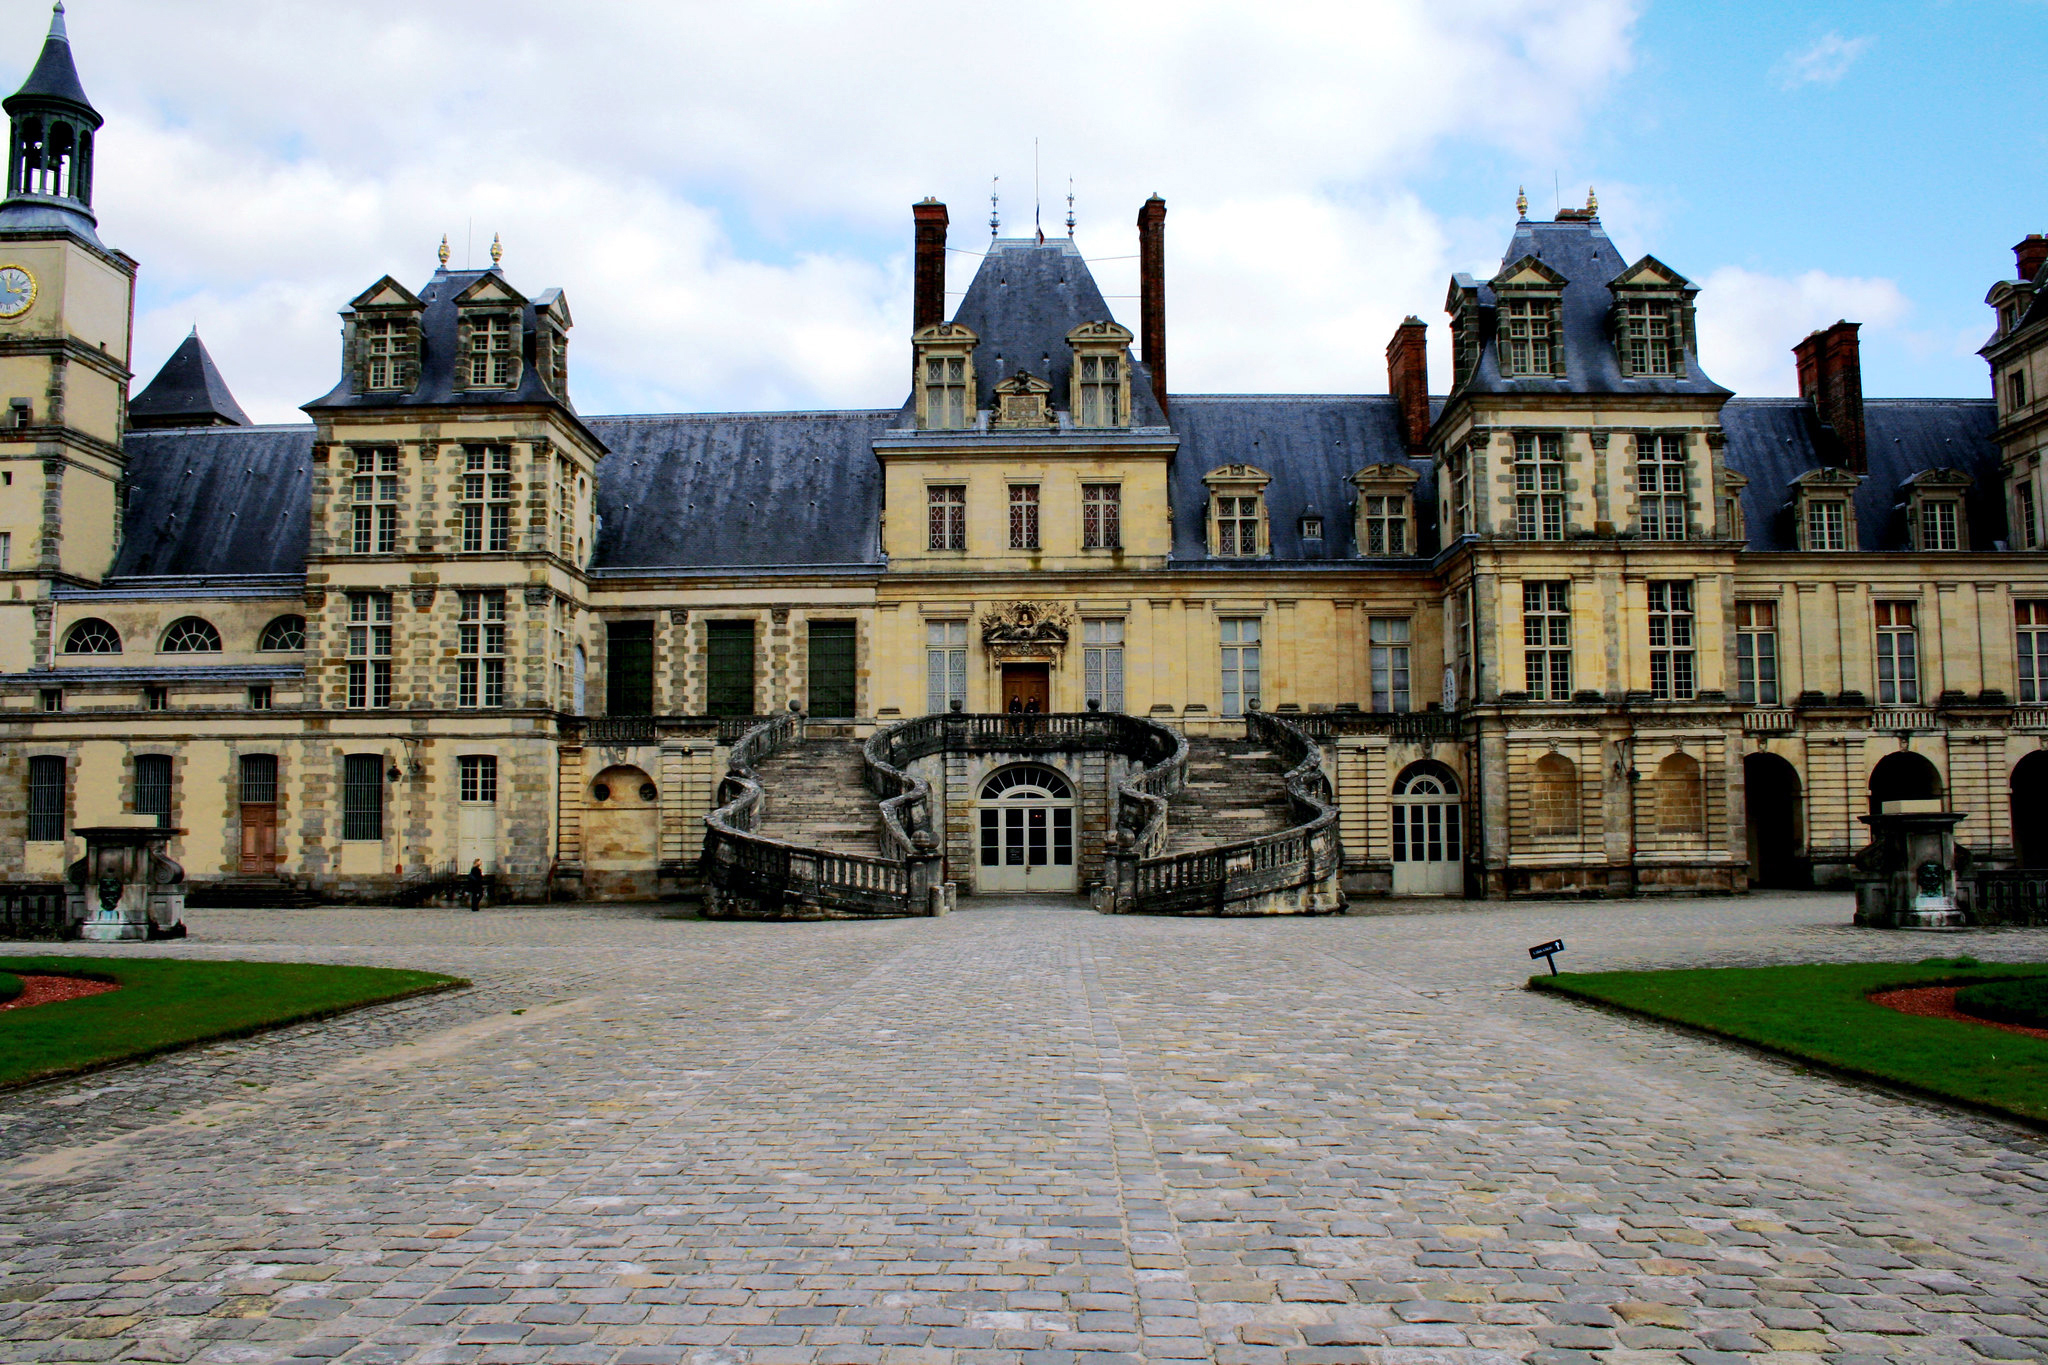 Château de Fontainebleau, initial design by Gilles Le Breton, 1528-1540, with additions until the 18th century (photo: nanabcn19, CC BY-NC-ND 2.0)